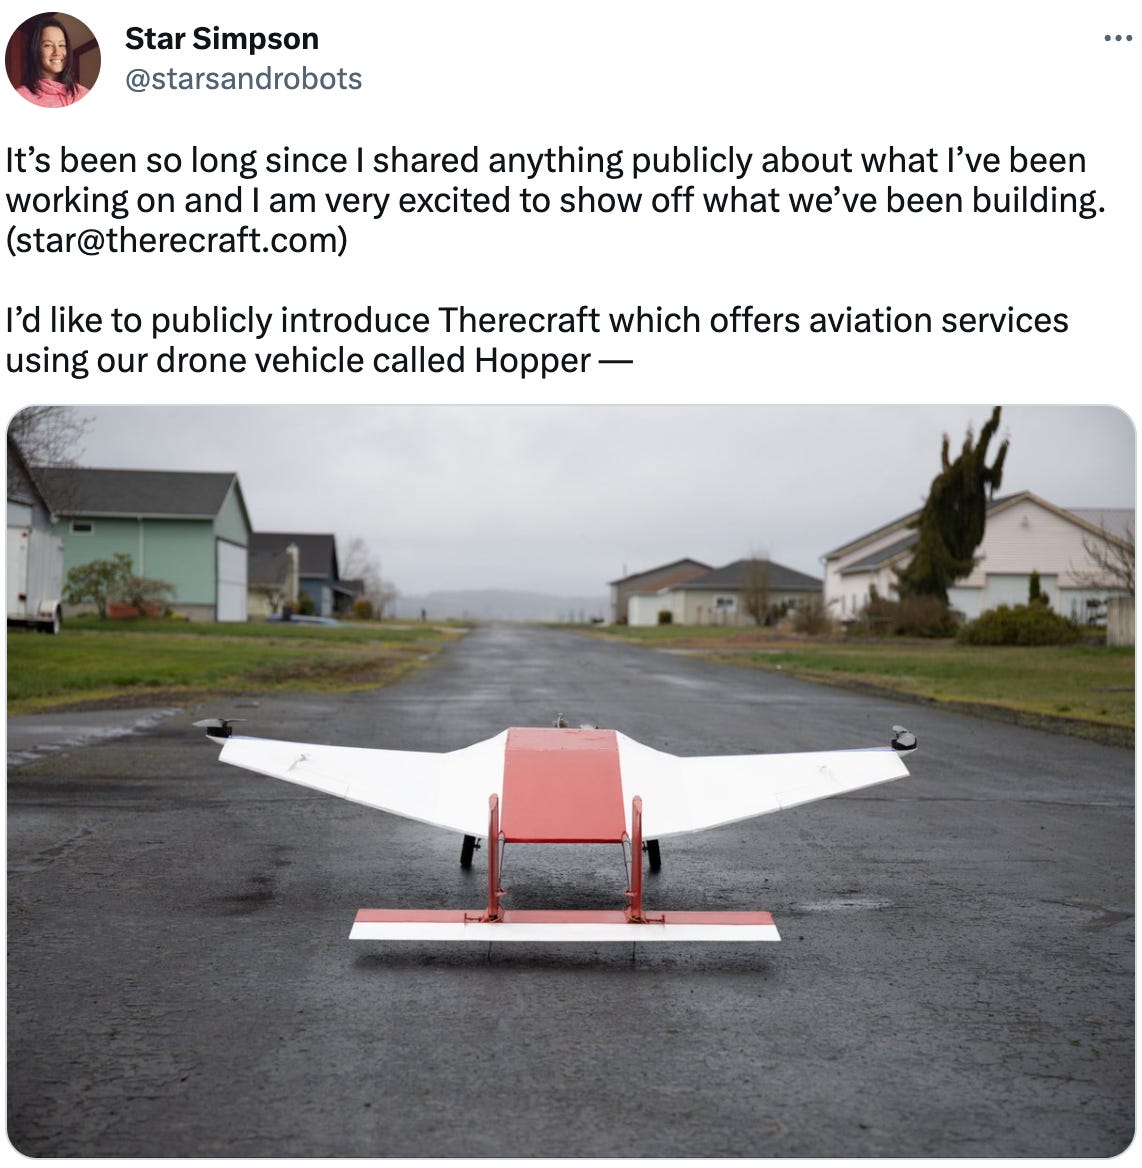  It’s been so long since I shared anything publicly about what I’ve been working on and I am very excited to show off what we’ve been building. (star@therecraft.com)  I’d like to publicly introduce Therecraft which offers aviation services using our drone vehicle called Hopper —